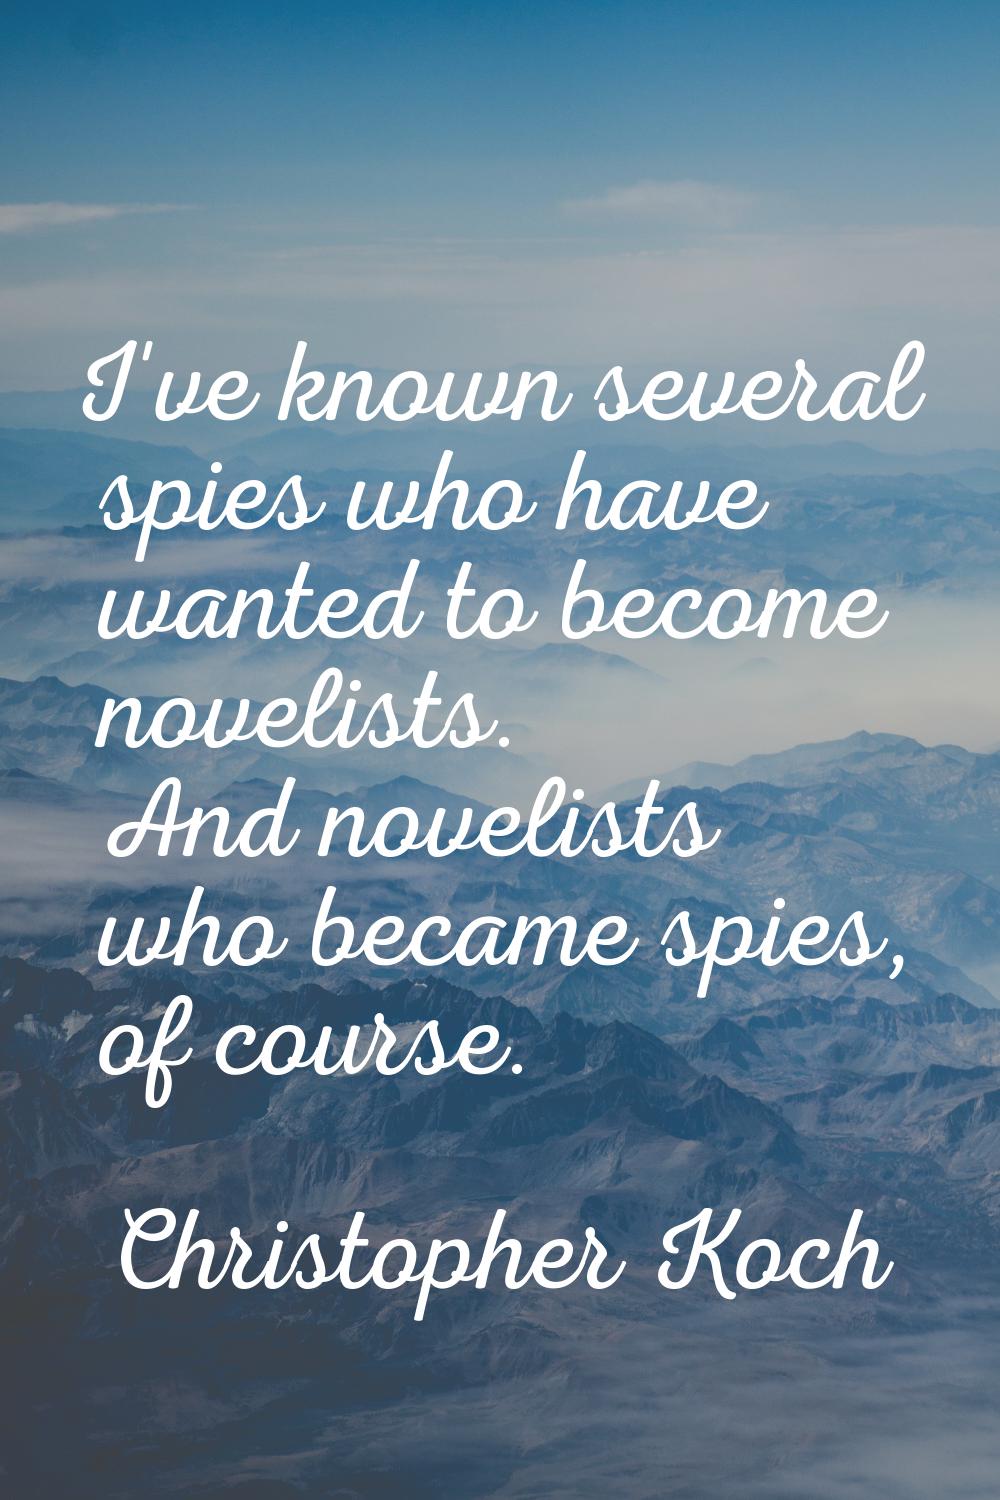 I've known several spies who have wanted to become novelists. And novelists who became spies, of co